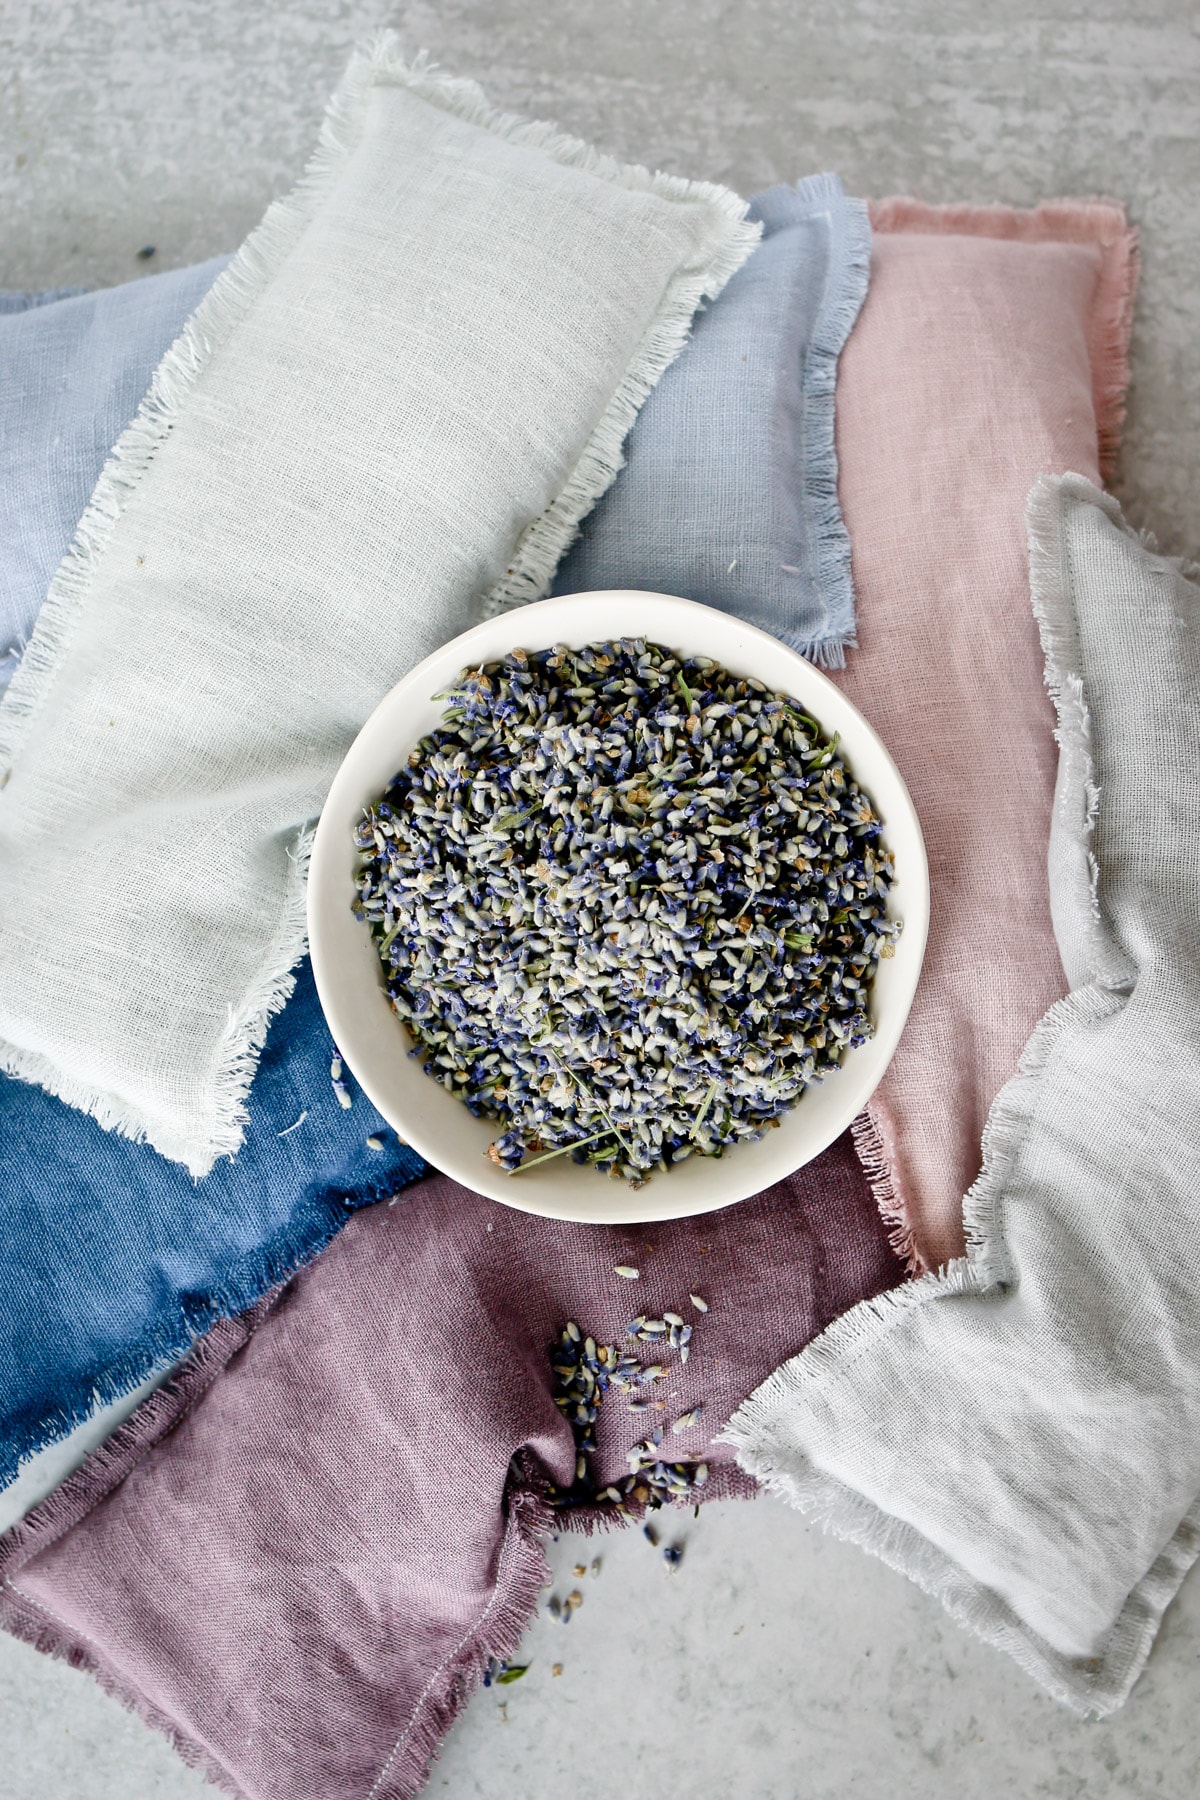 DIY Linen Lavender Eye Pillows and a bowl of dried lavender buds